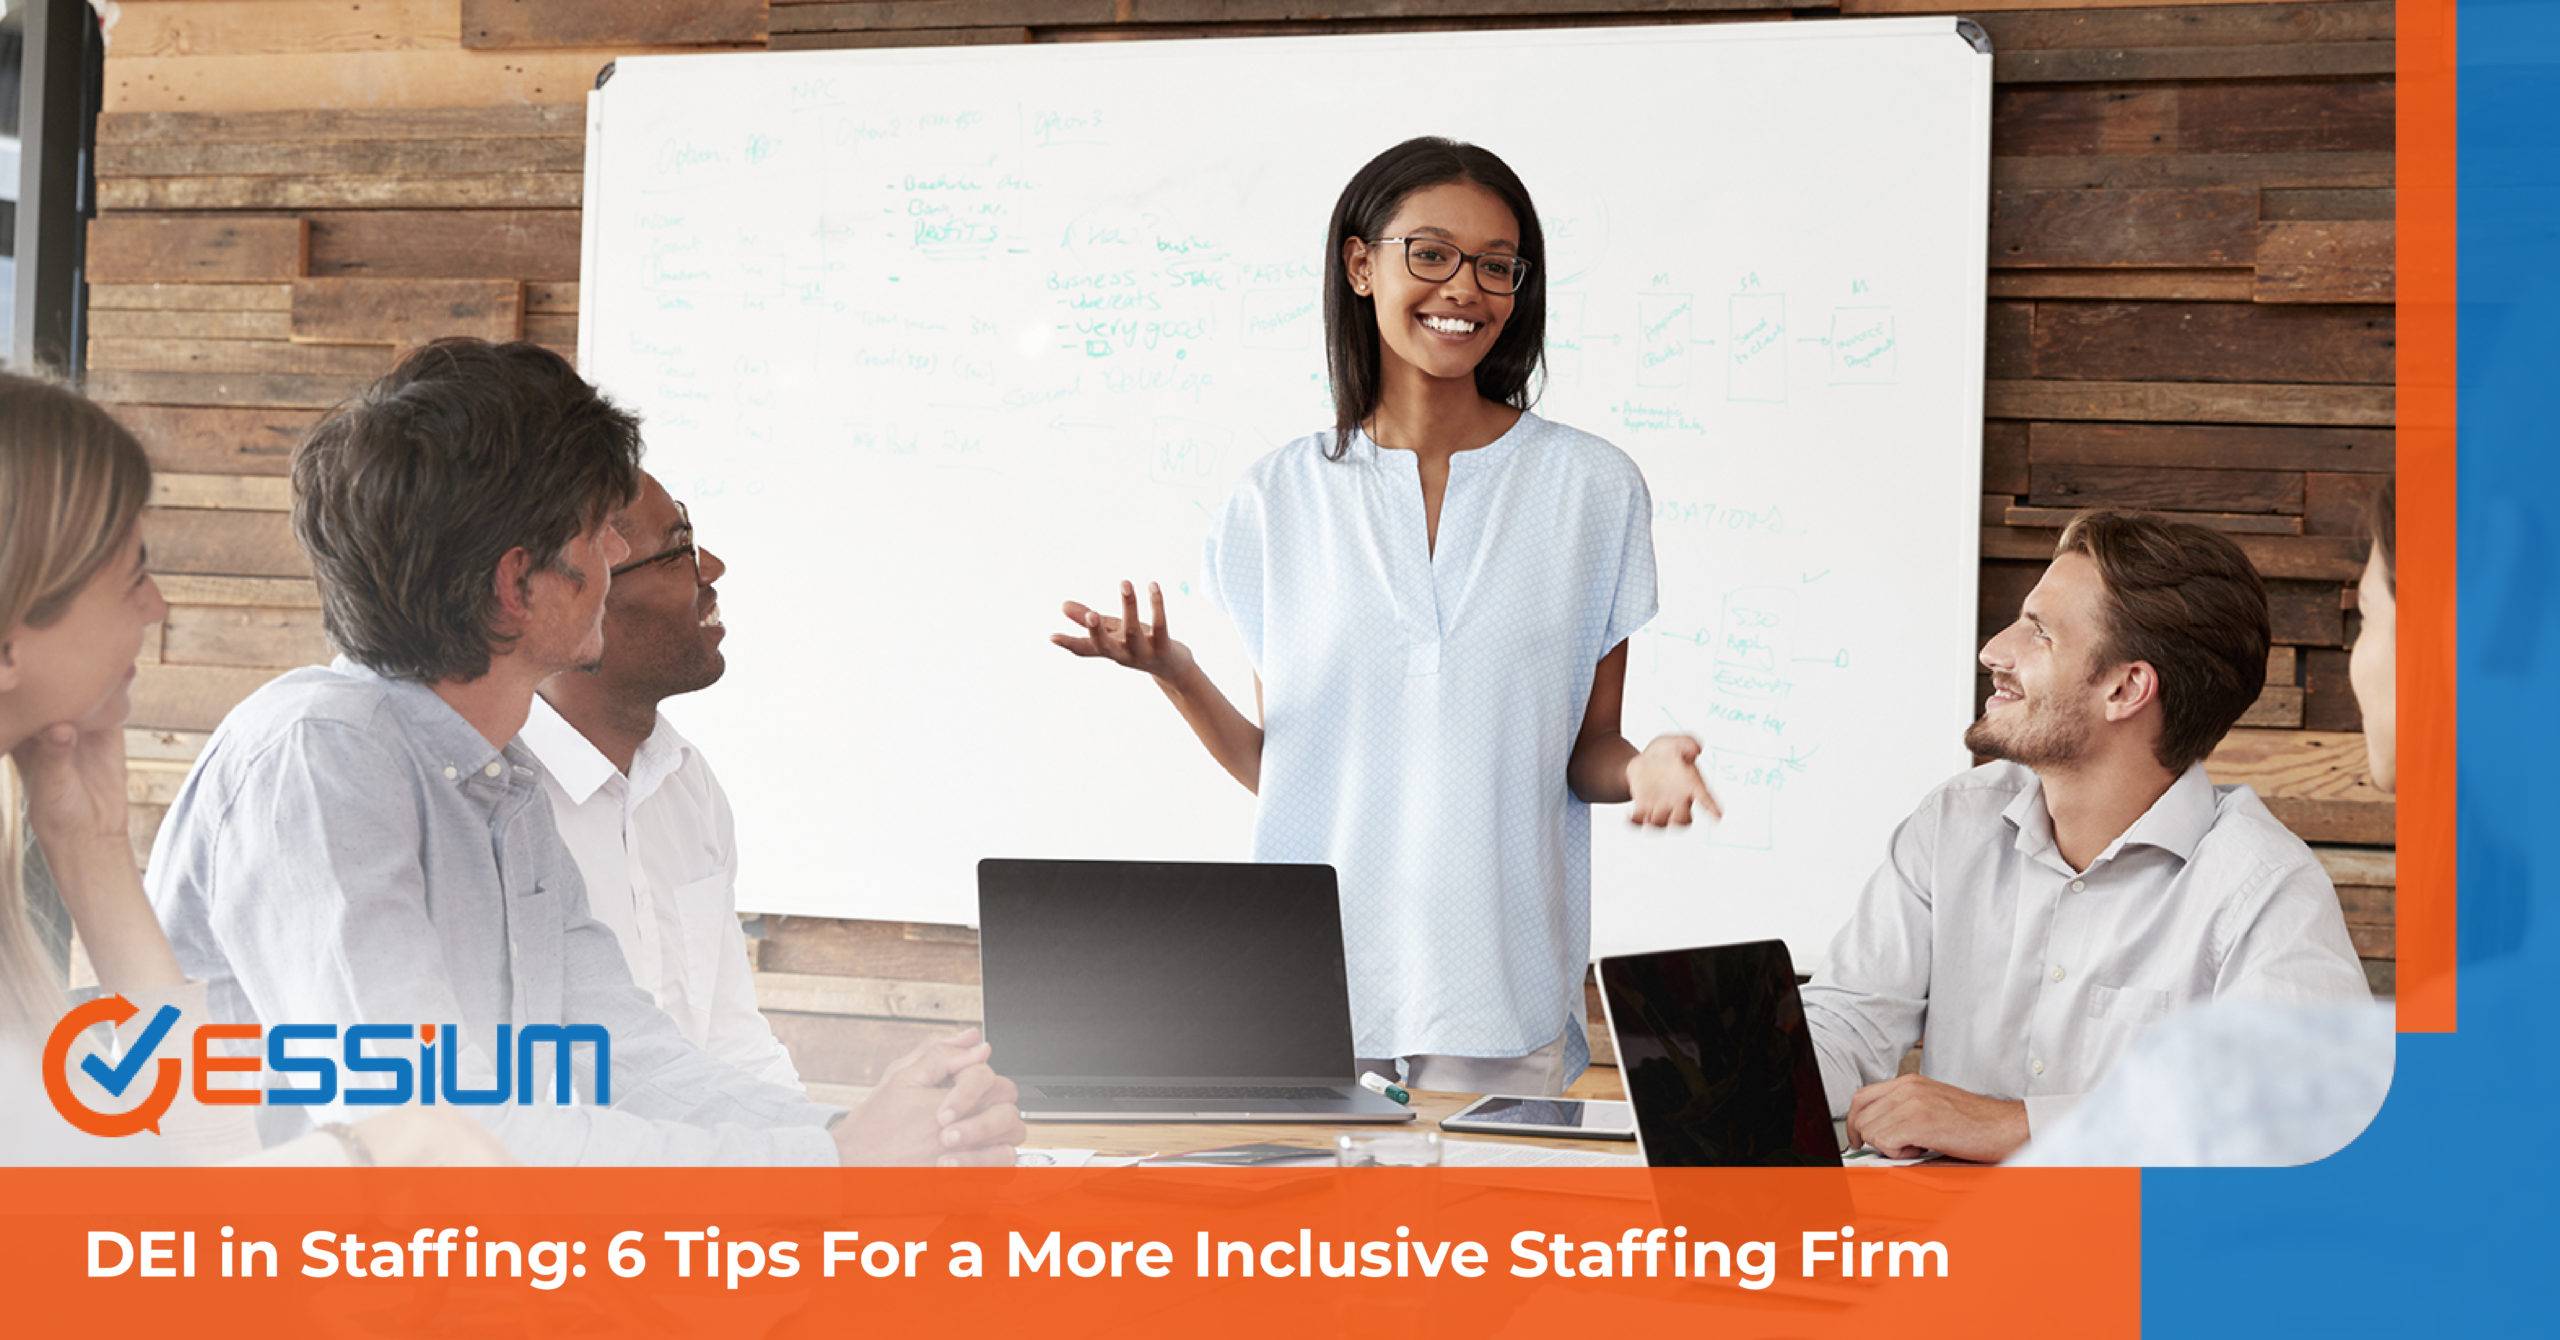 DEI in Staffing 6 Tips For a More Inclusive Staffing Firm